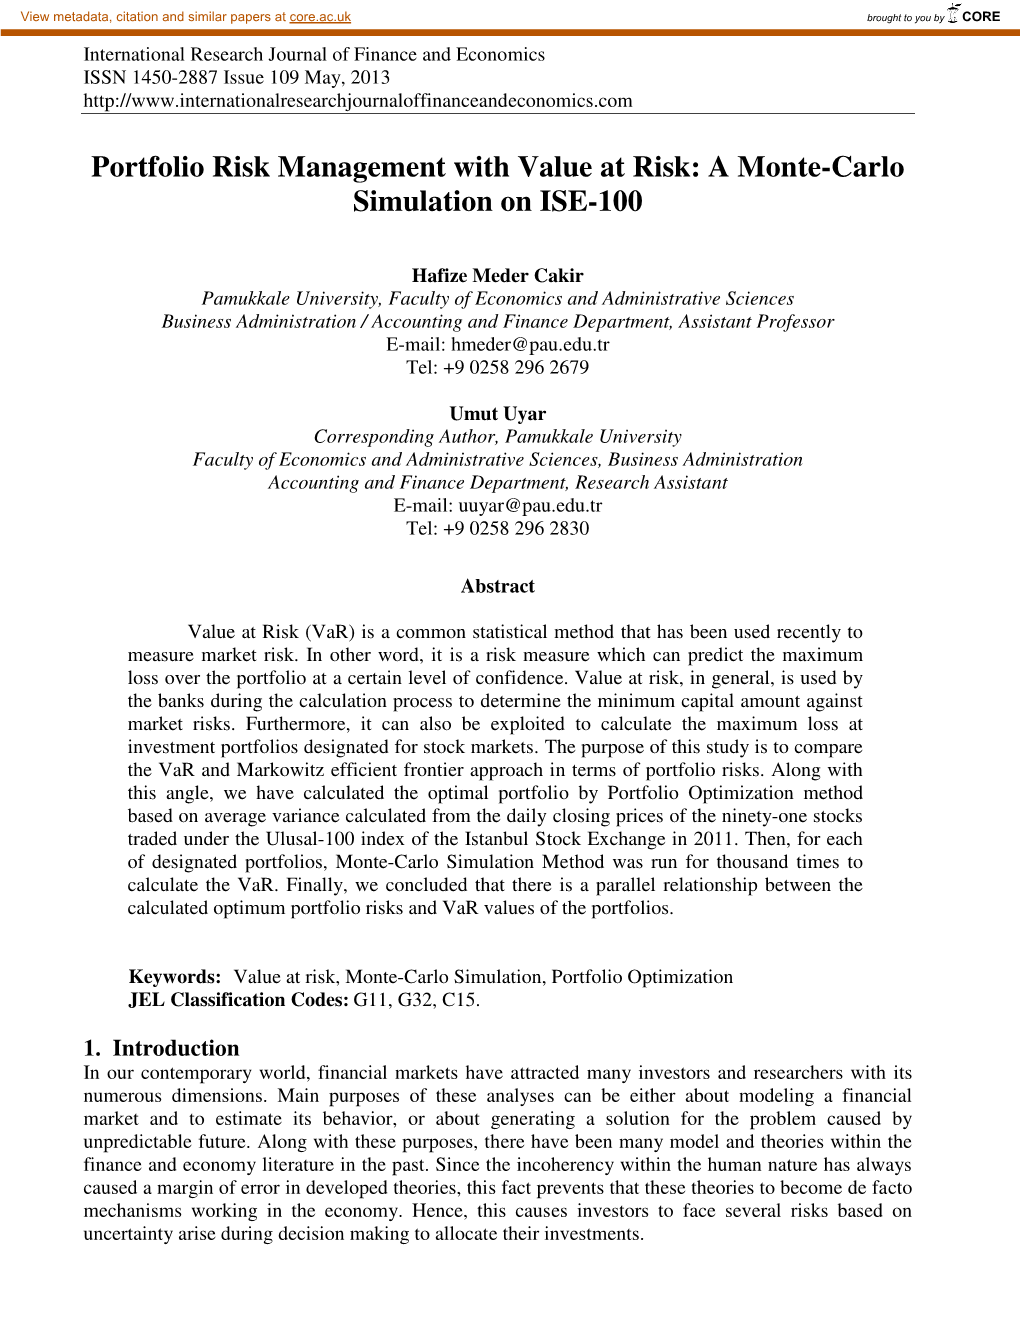 Portfolio Risk Management with Value at Risk: a Monte-Carlo Simulation on ISE-100